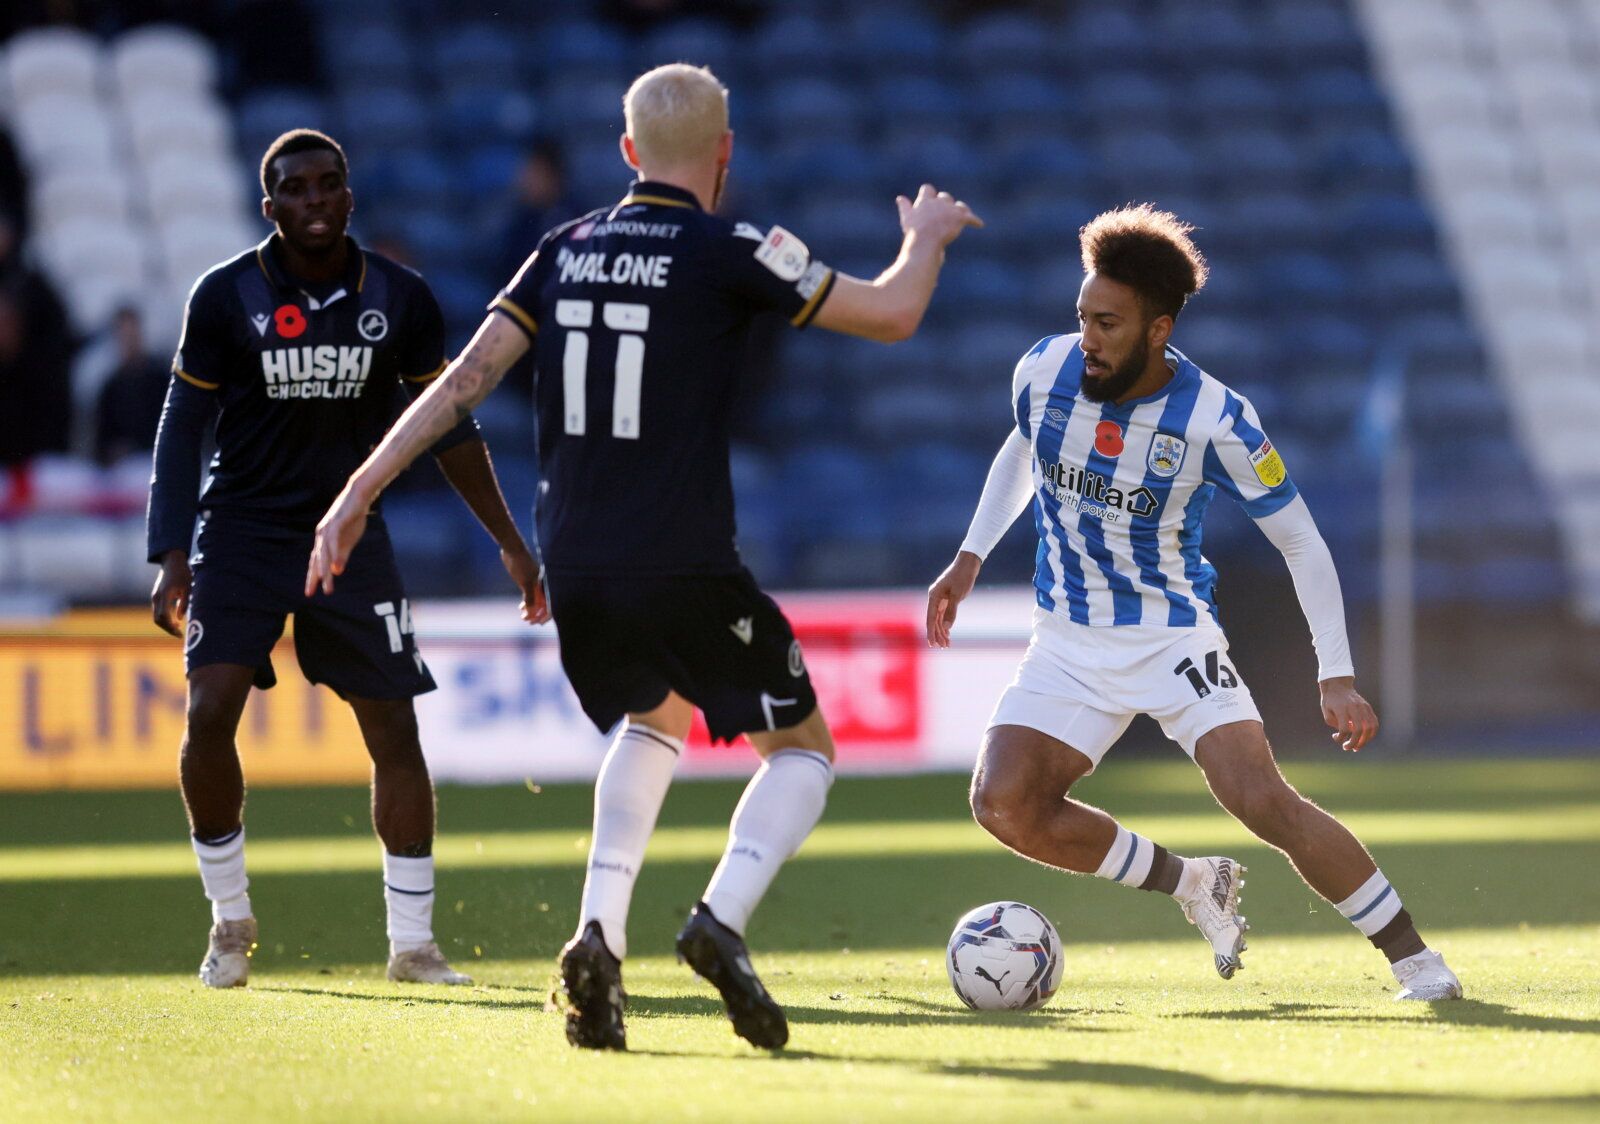 Soccer Football - Championship - Huddersfield Town v Millwall - John Smith's Stadium, Huddersfield, Britain - October 30, 2021 Huddersfield Town's Sorba Thomas in action with Millwall's Scott Malone  Action Images/John Clifton  EDITORIAL USE ONLY. No use with unauthorized audio, video, data, fixture lists, club/league logos or 